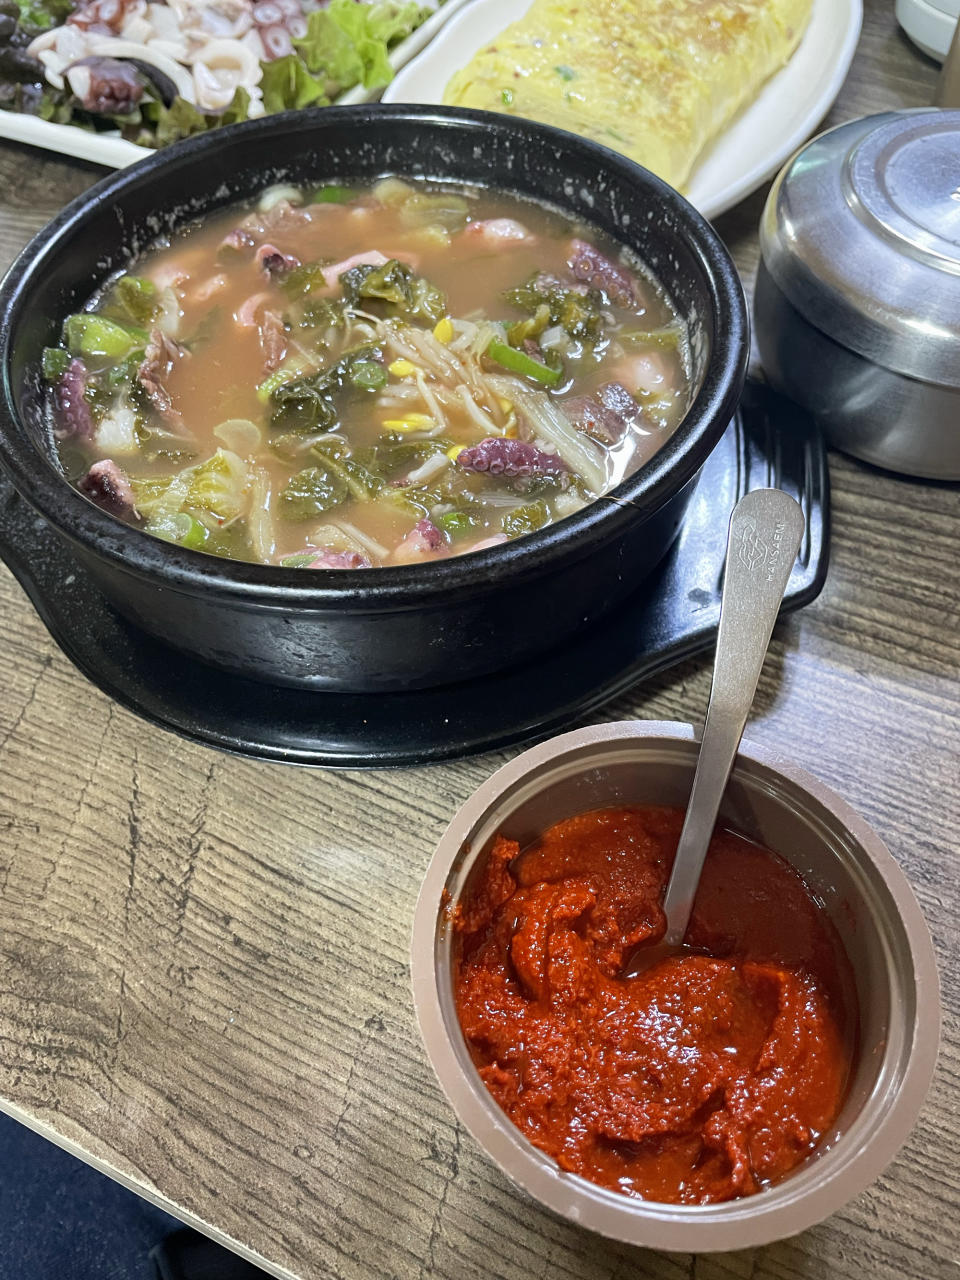 The octopus rice soup tastes better if you add the chilli paste. (Photo: Lim Yian Lu)